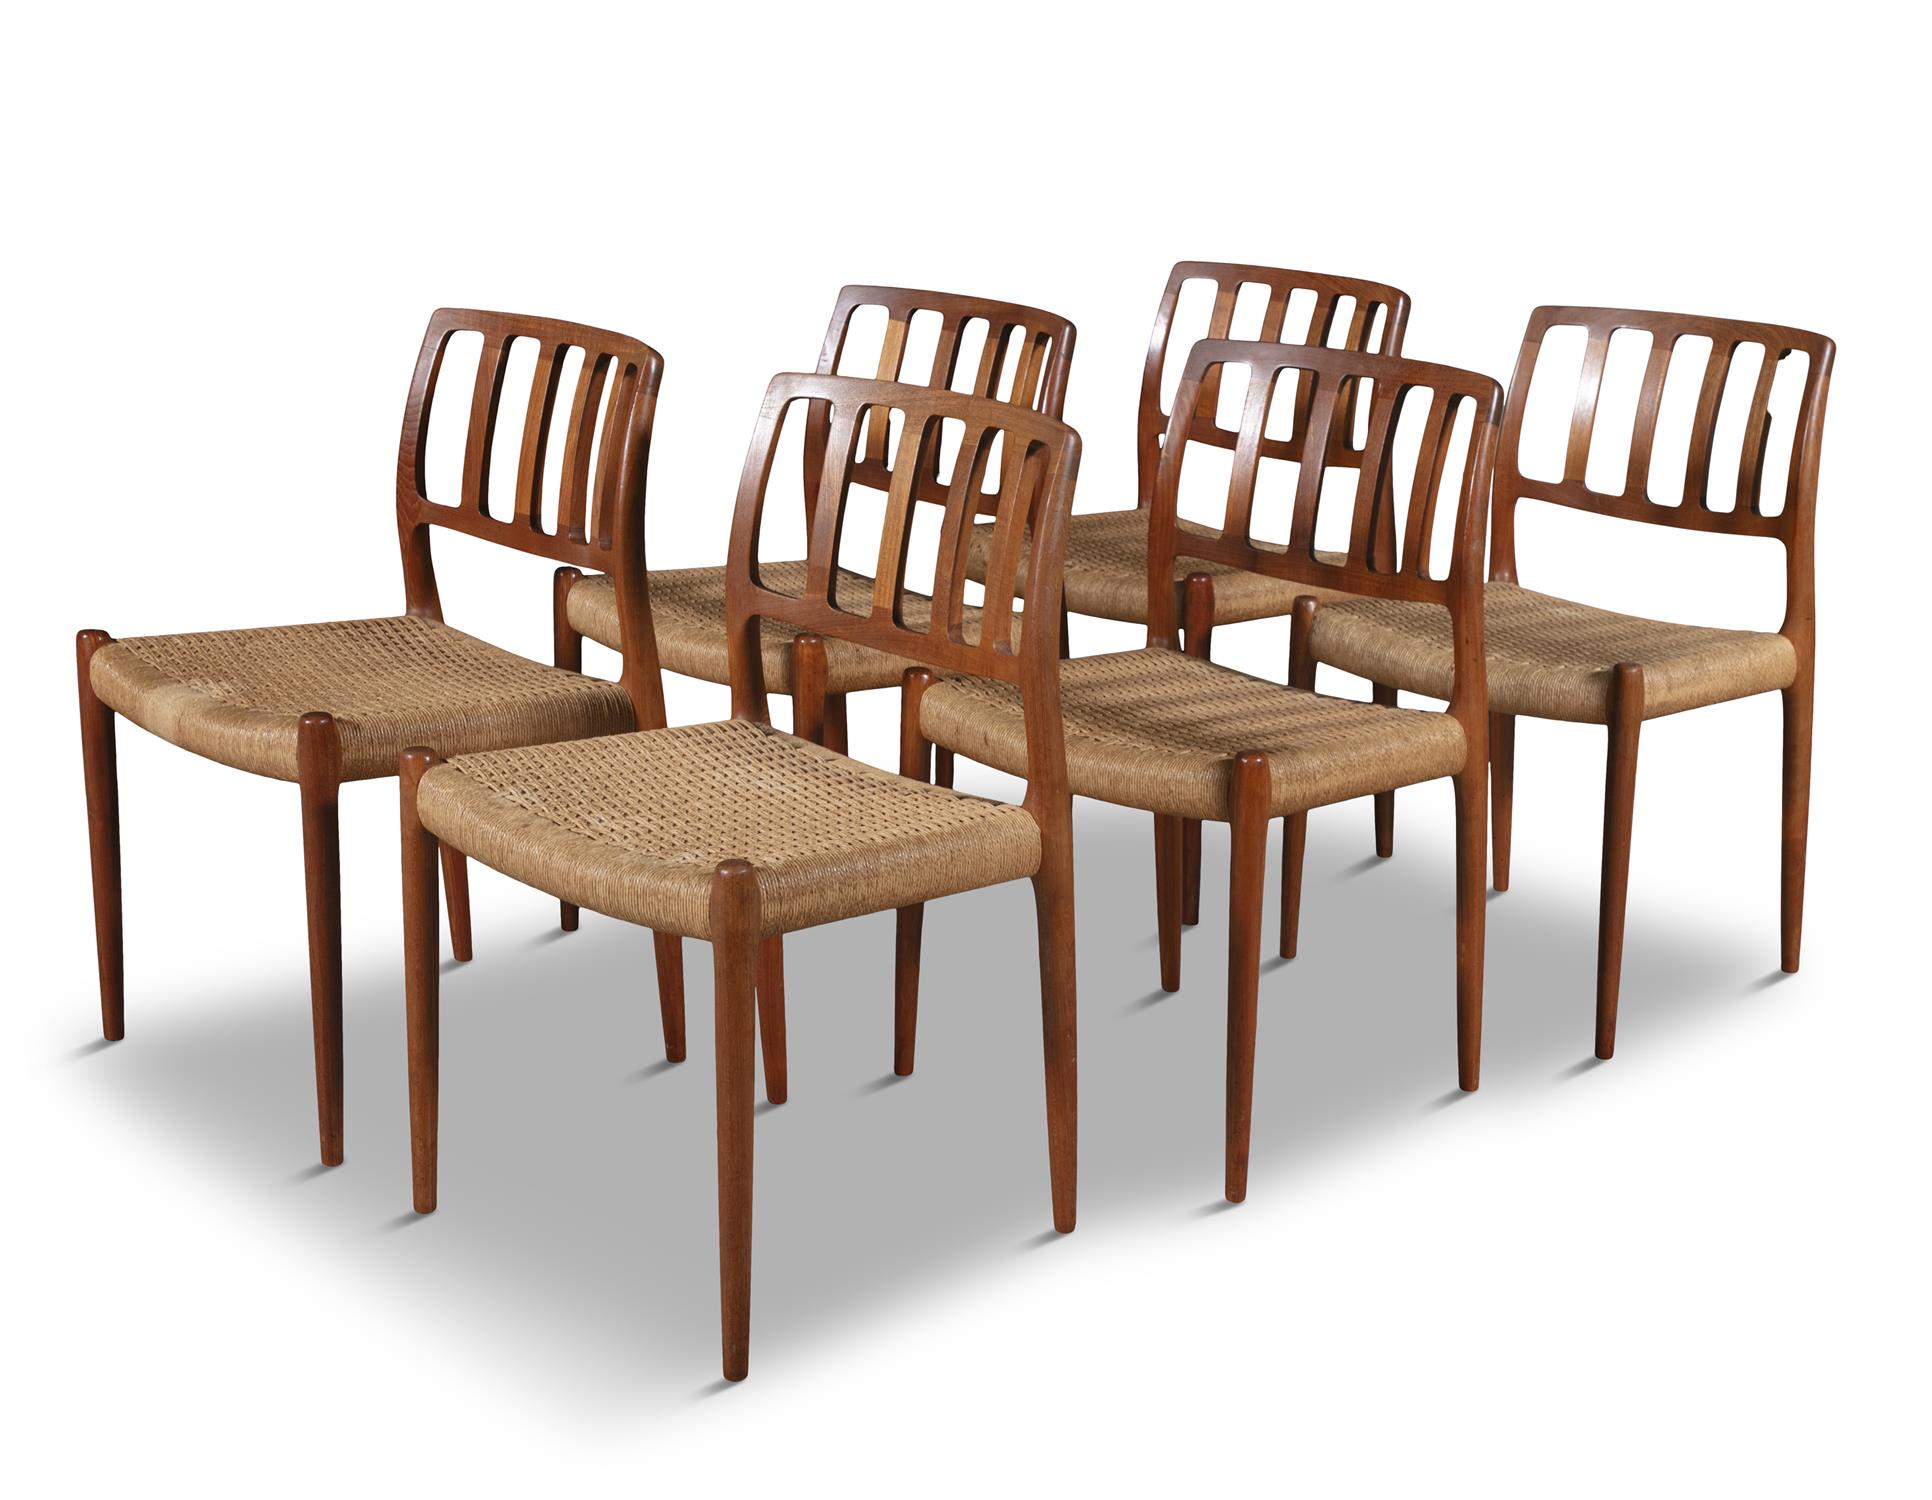 NEILS OTTO MØLLER (1920 - 1982) A set of six cane work dining chairs by Niels Otto Møller.